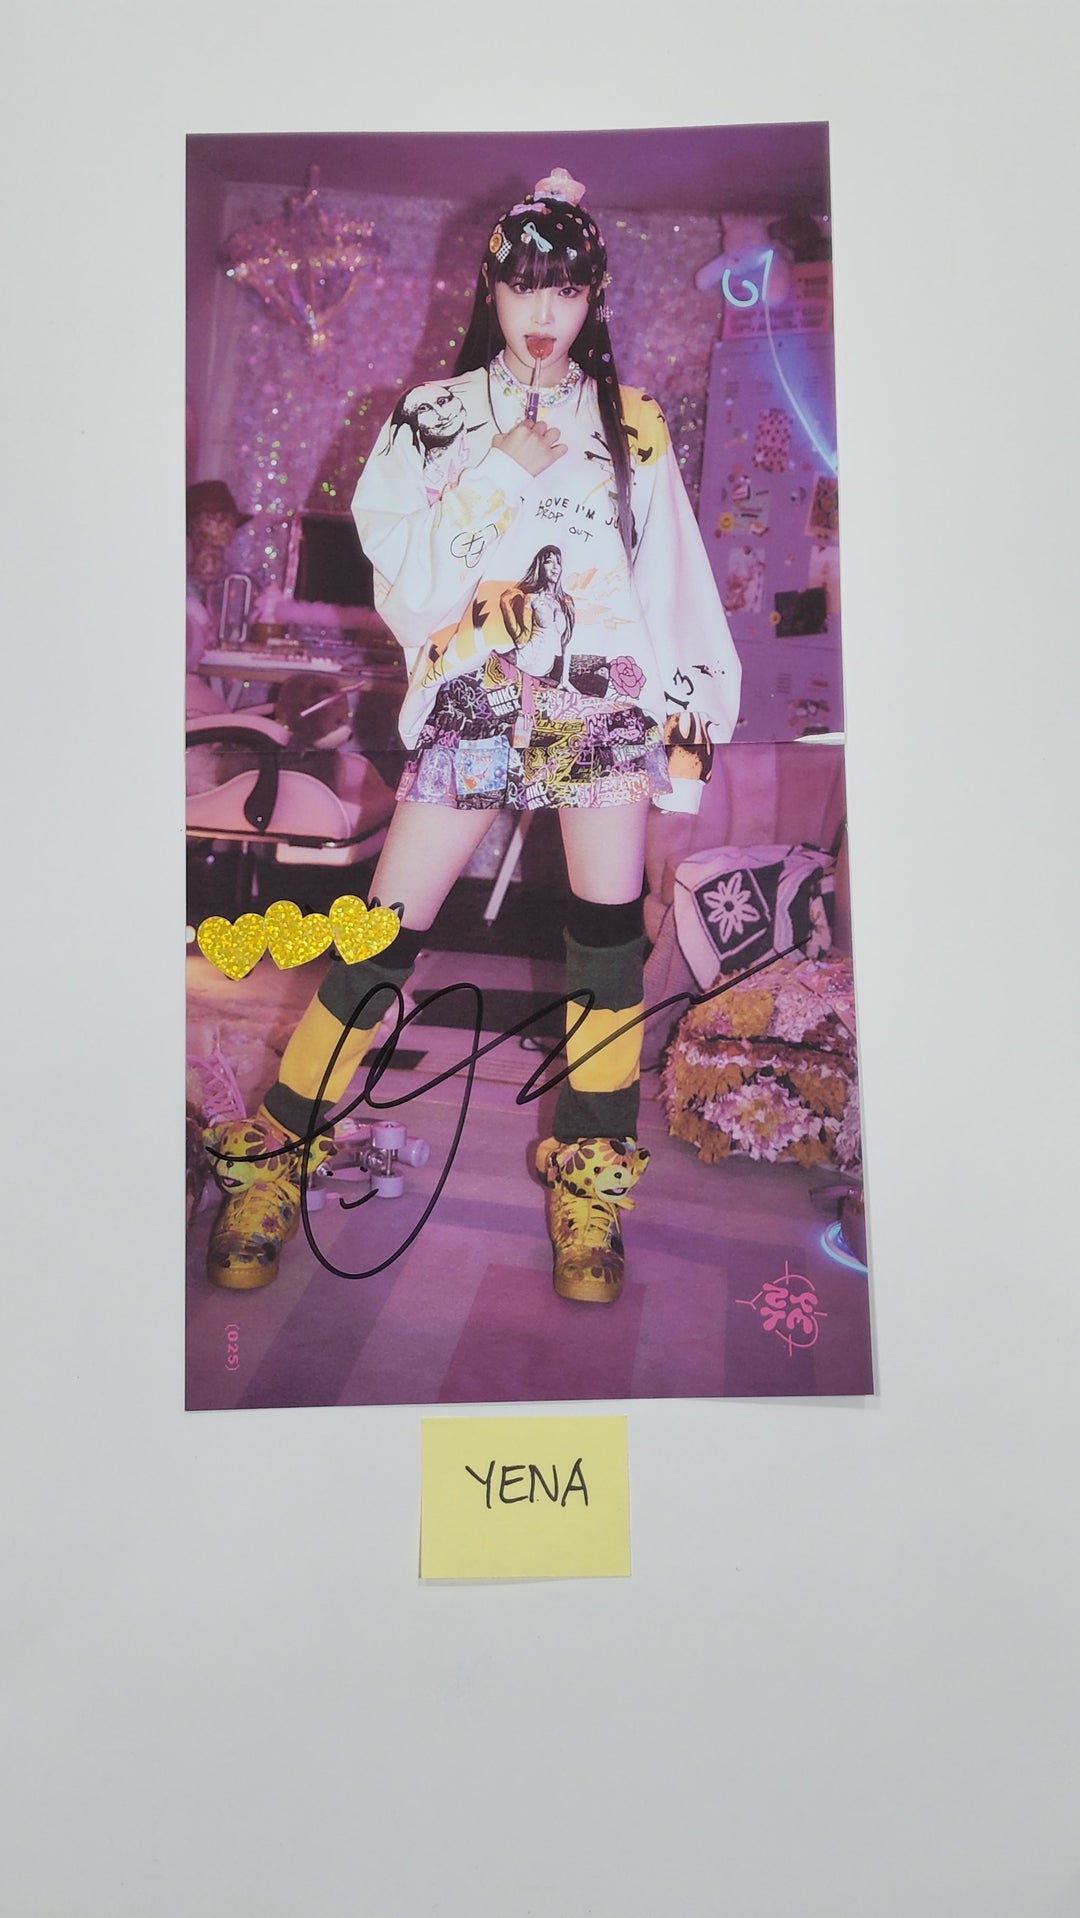 YENA "SMARTPHONE" - Folded A Cut Page From Fansign Event Album